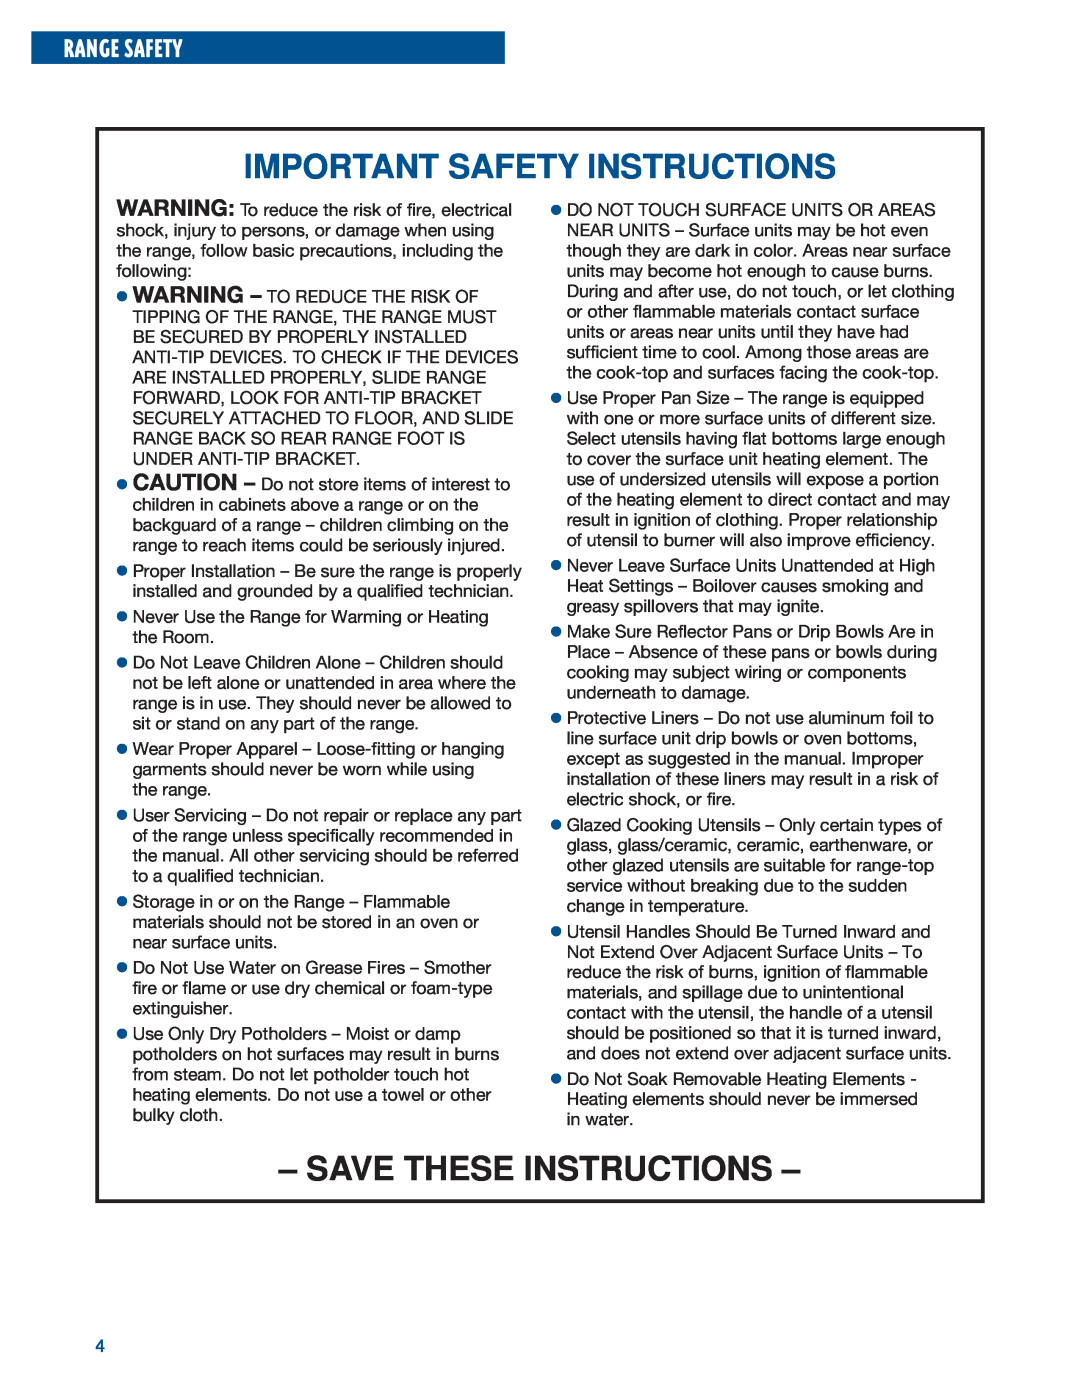 Whirlpool RF315PXE warranty Important Safety Instructions, Save These Instructions, Range Safety 